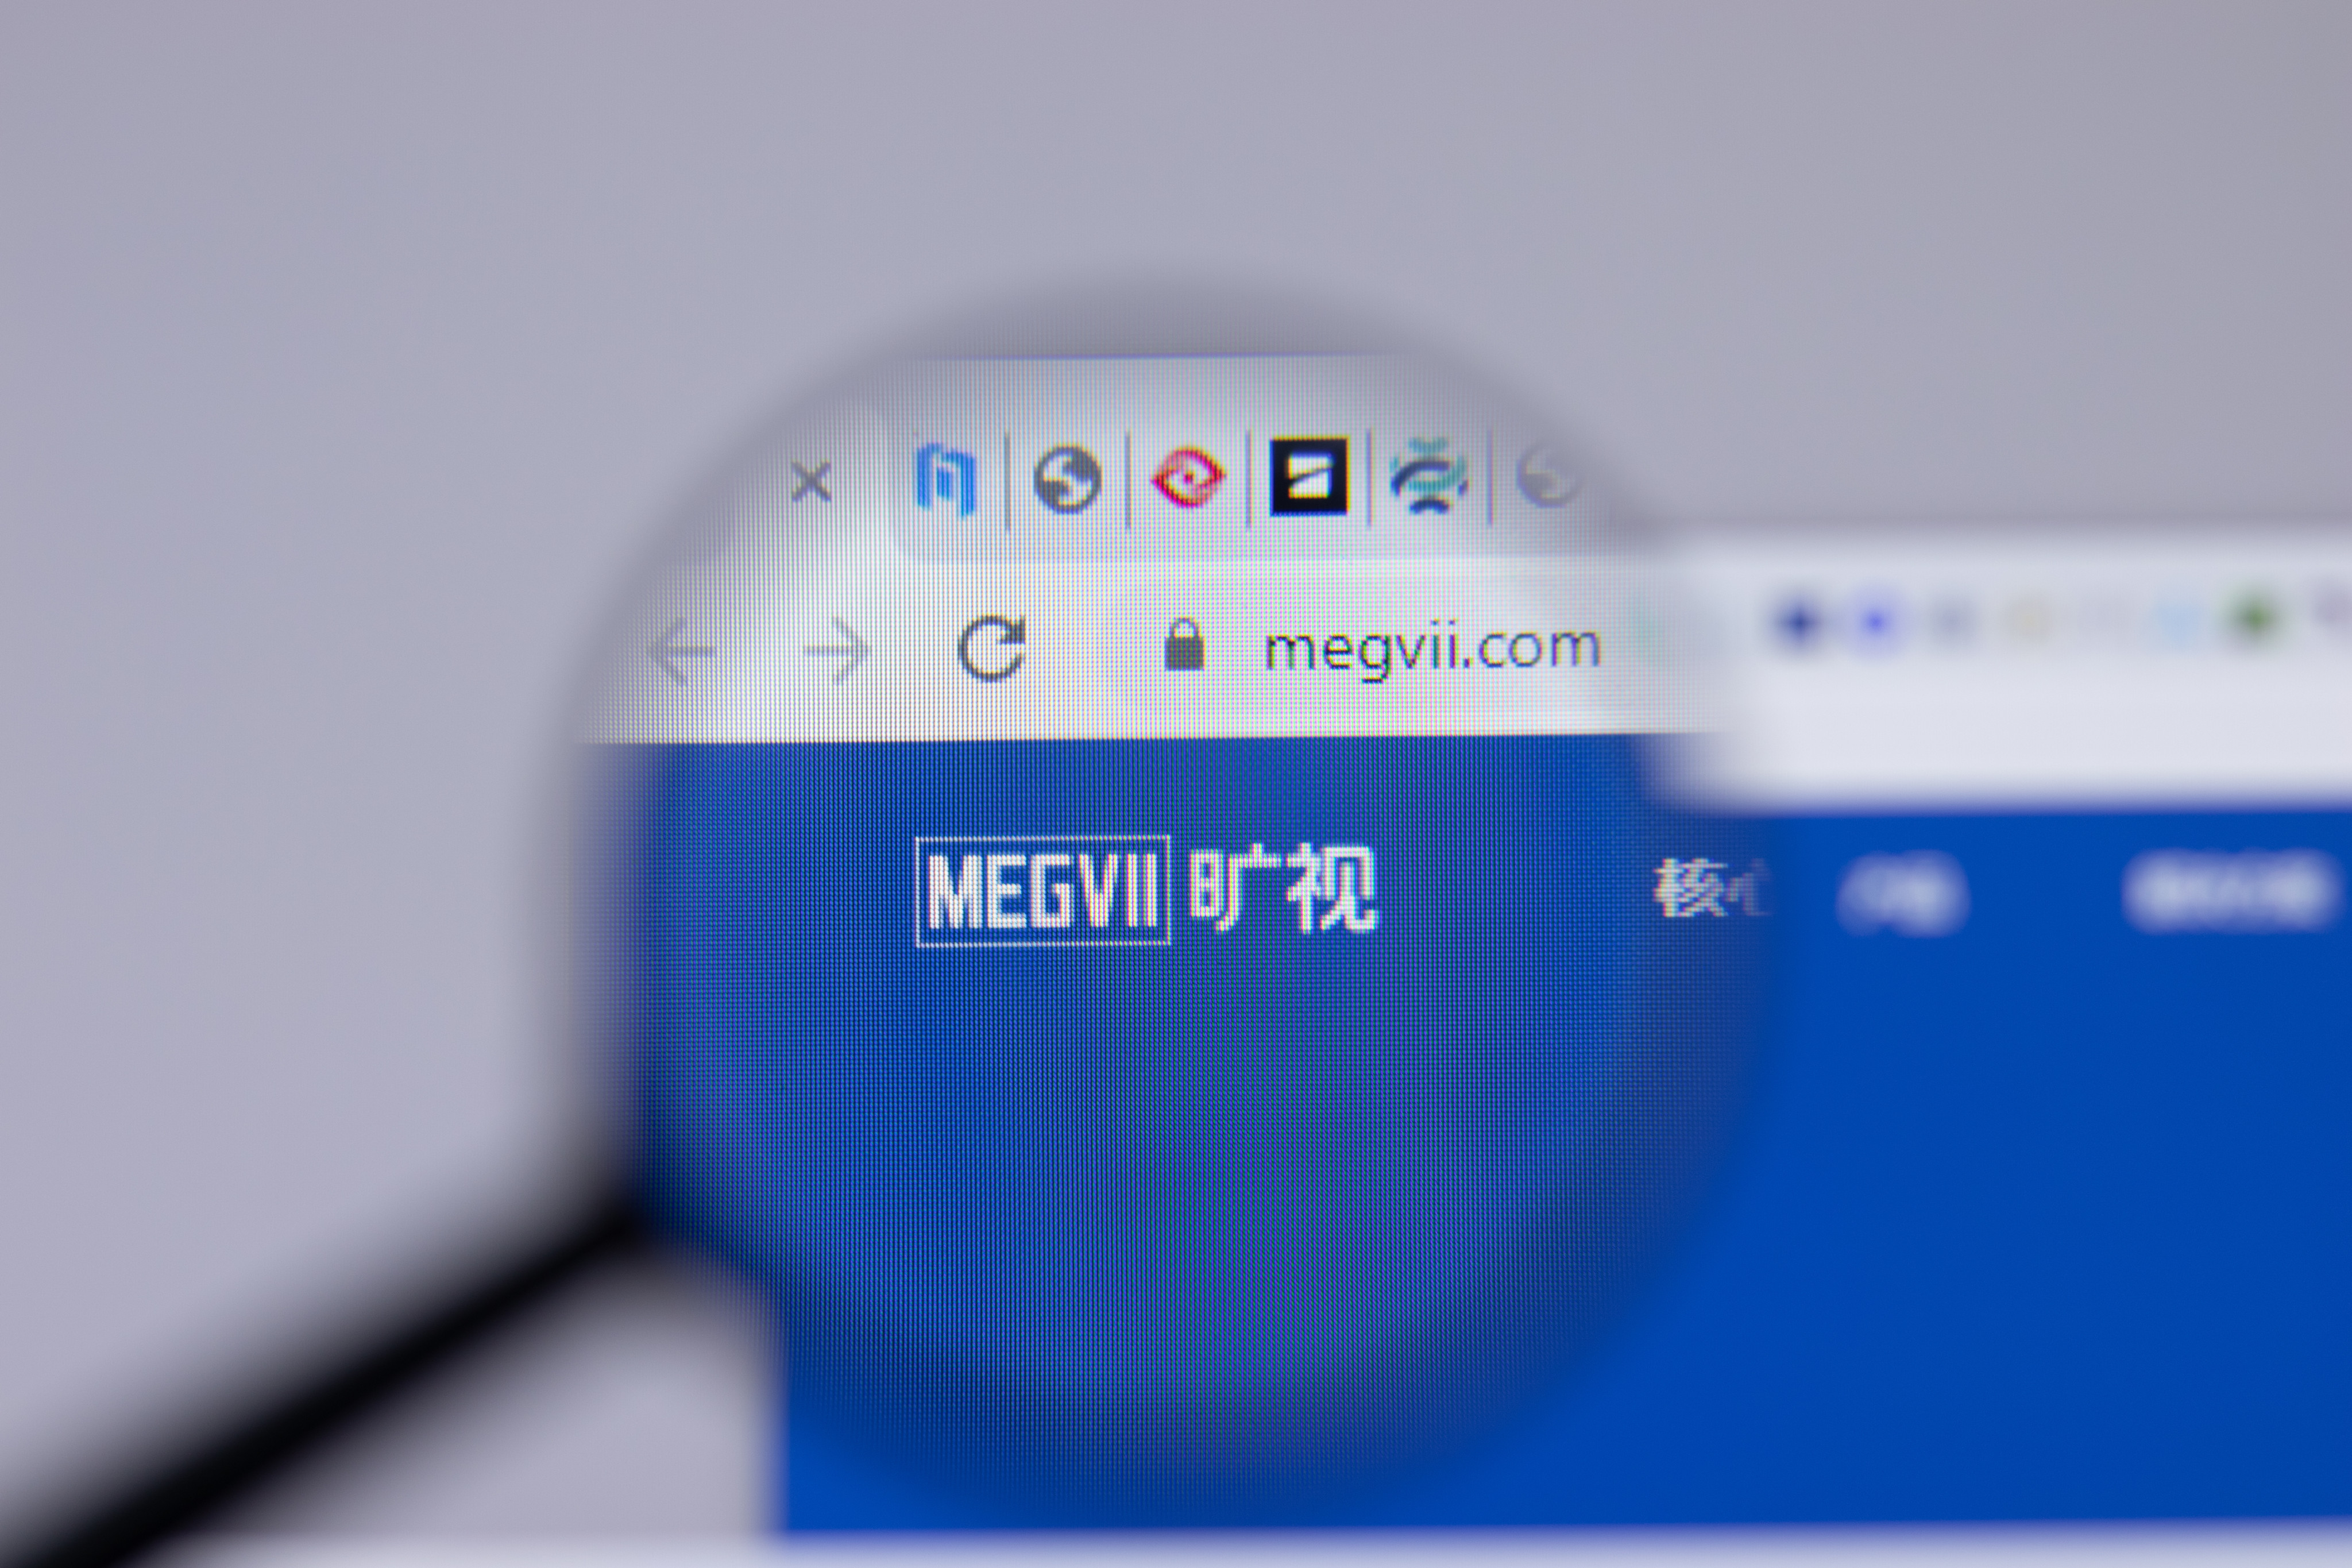 The latest round of lay-offs at Megvii Technology is just “normal personnel adjustment”, according to a company representative. Photo: Shutterstock